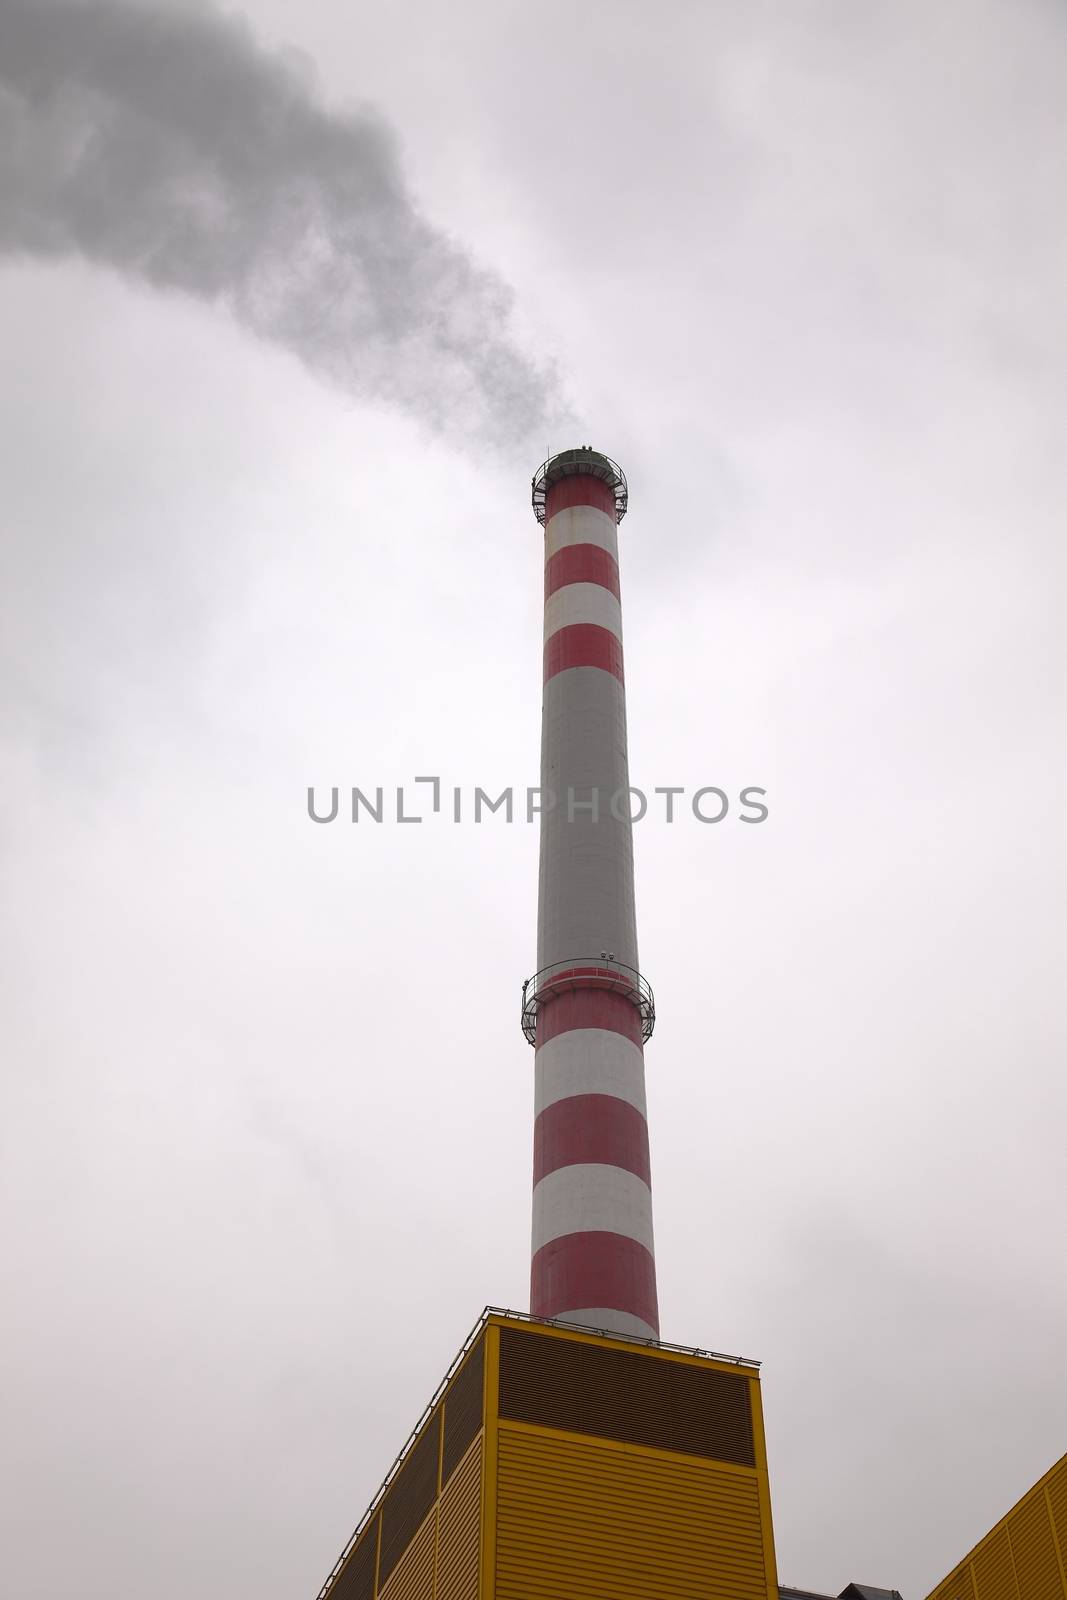 Industrial chimney smoking in the cloudy weather